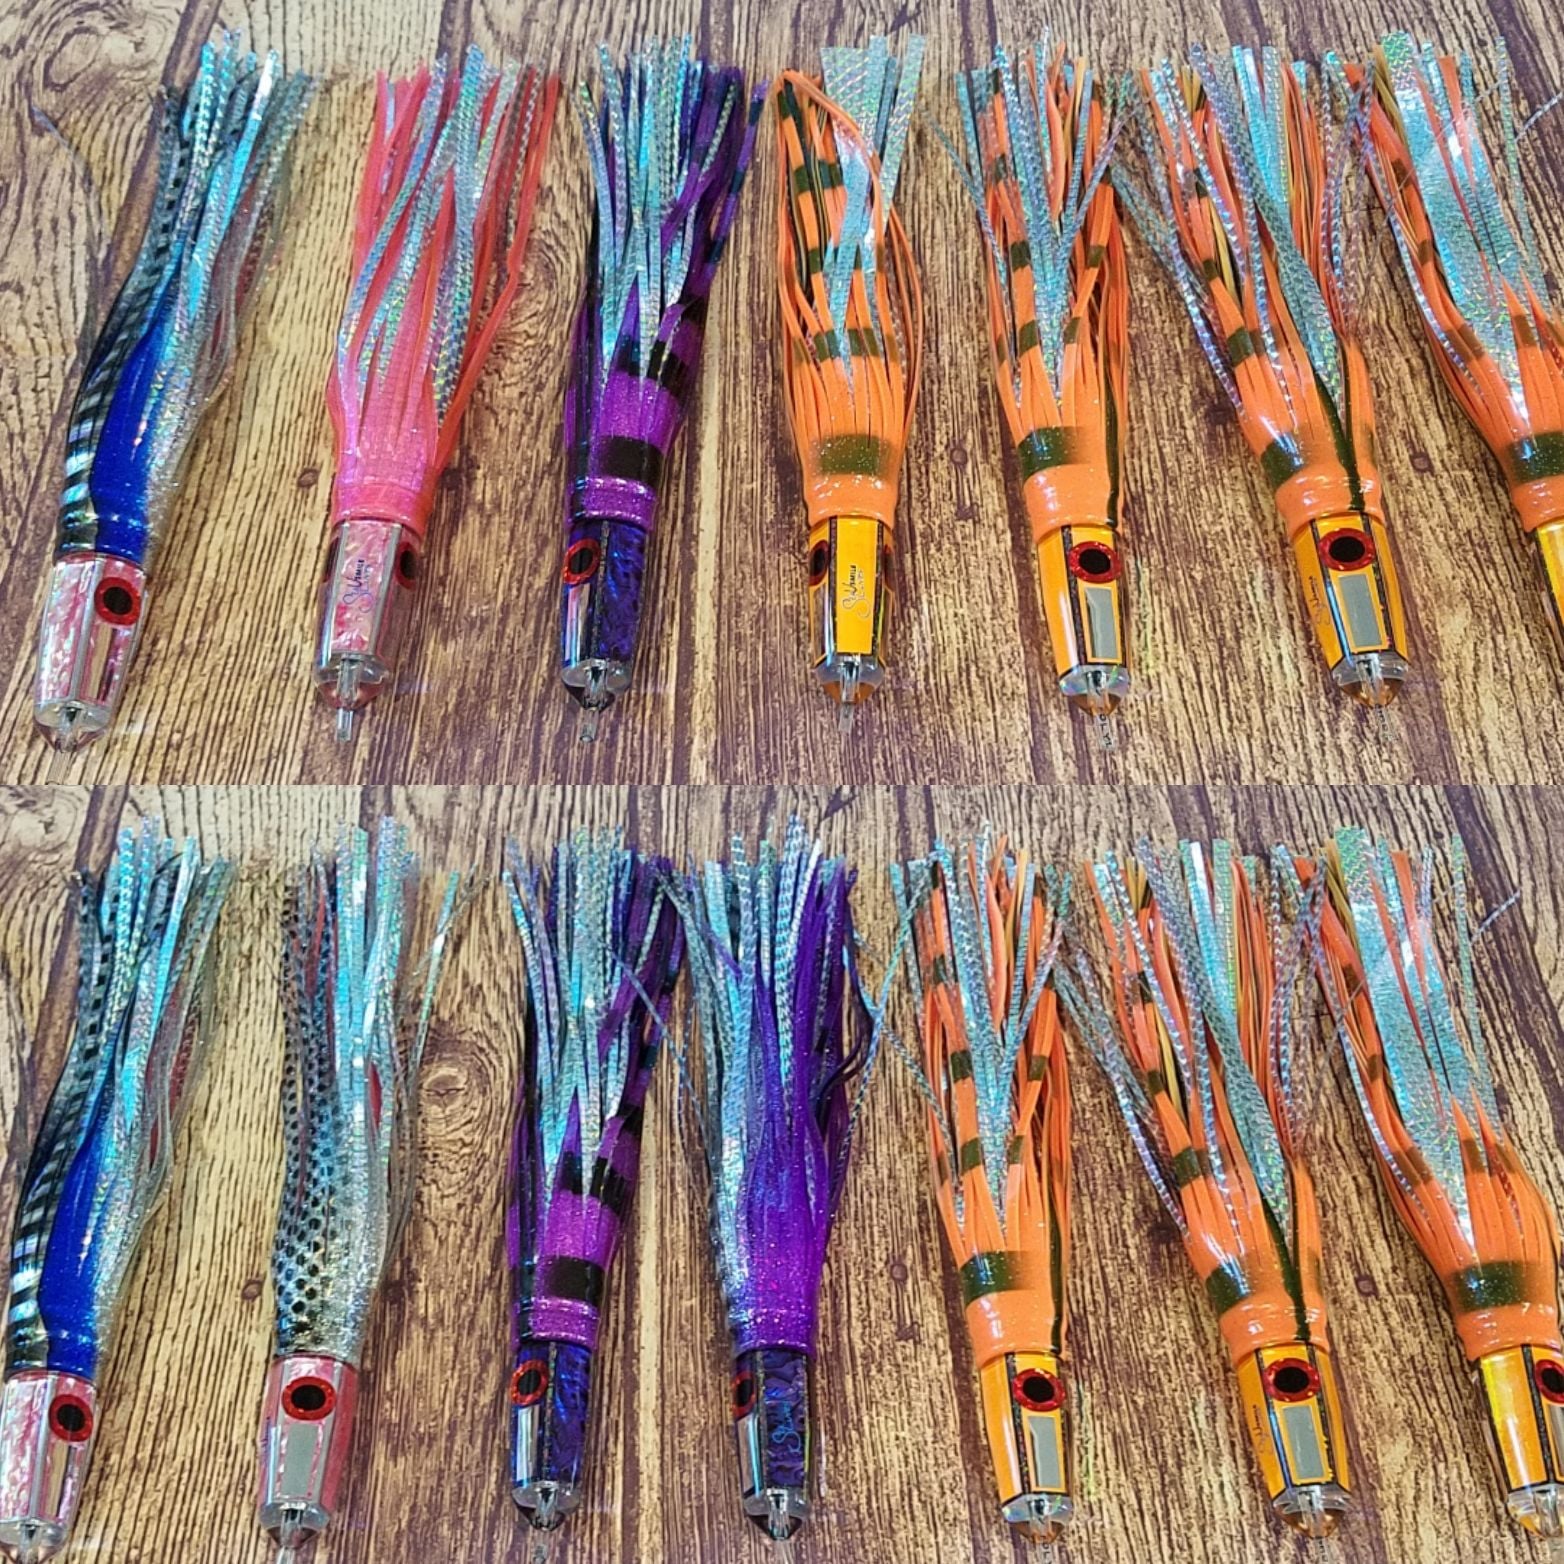 Resin trolling lure heads - The Hull Truth - Boating and Fishing Forum